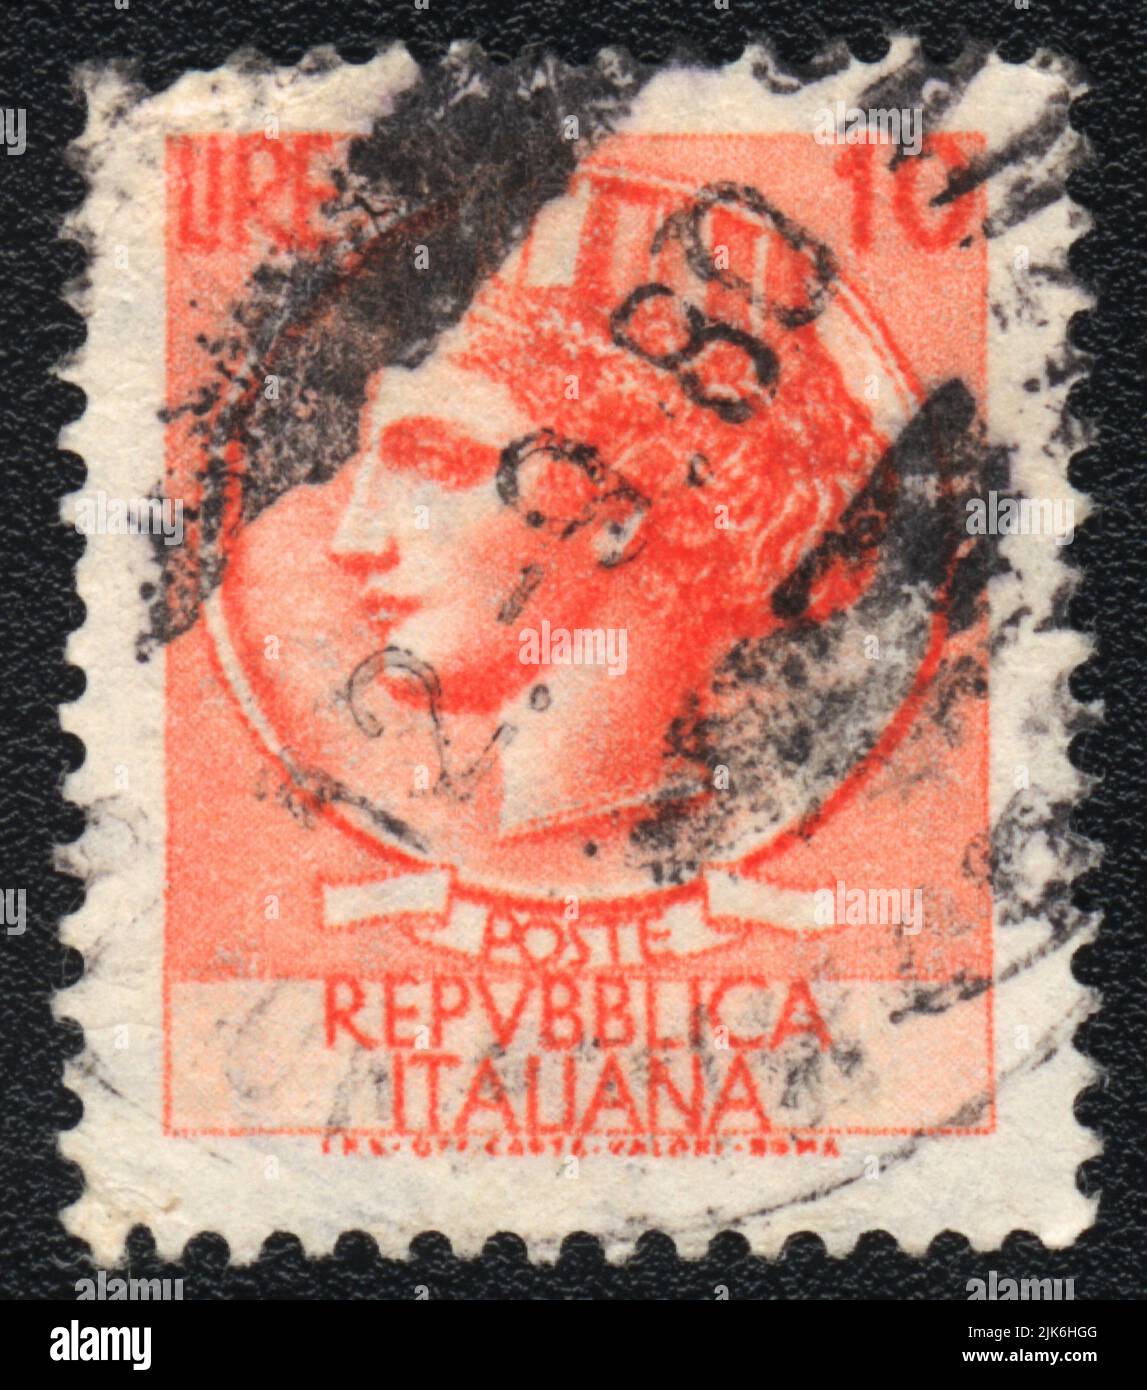 A stamp printed in Italy shows  Woman head, Italian Republic, in red color, 10 Lire, circa 1980 Stock Photo